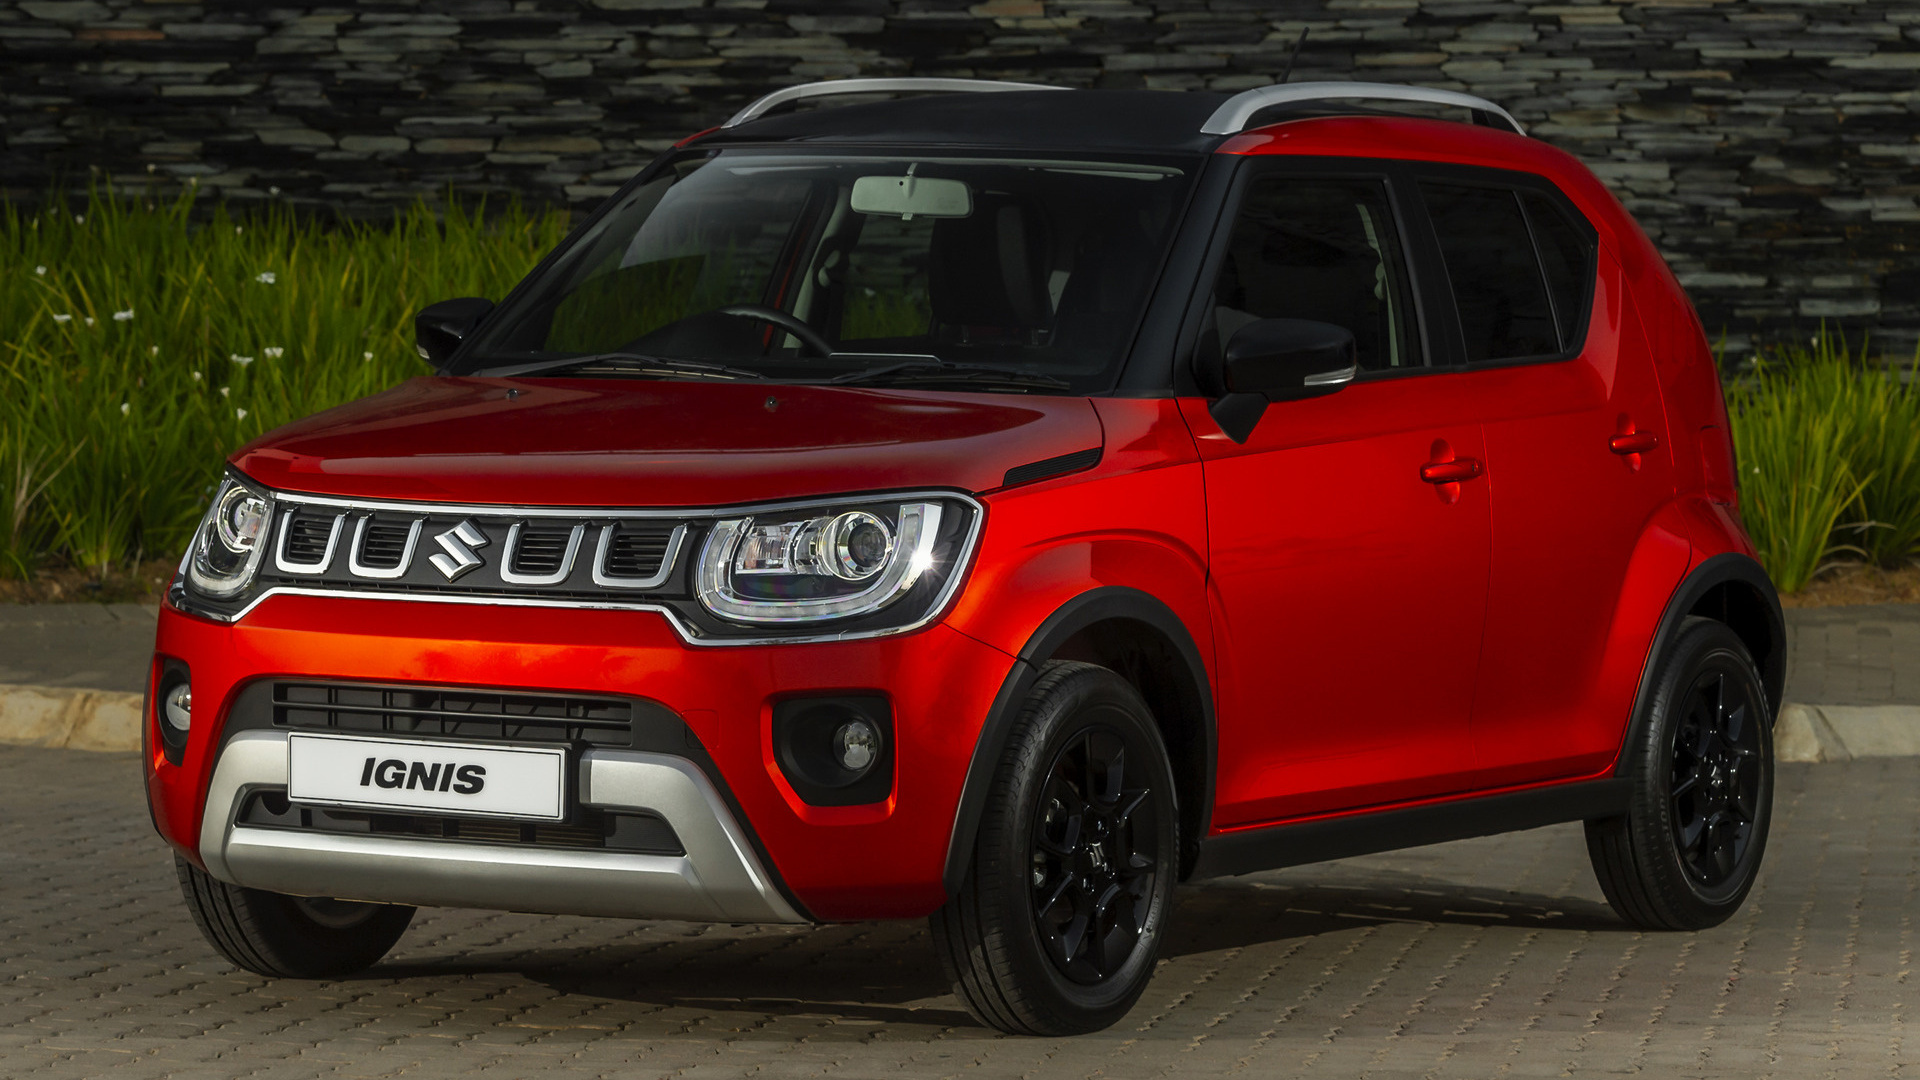 Suzuki Ignis 2020, Wallpaper collection, Car pixel gallery, High-quality images, 1920x1080 Full HD Desktop